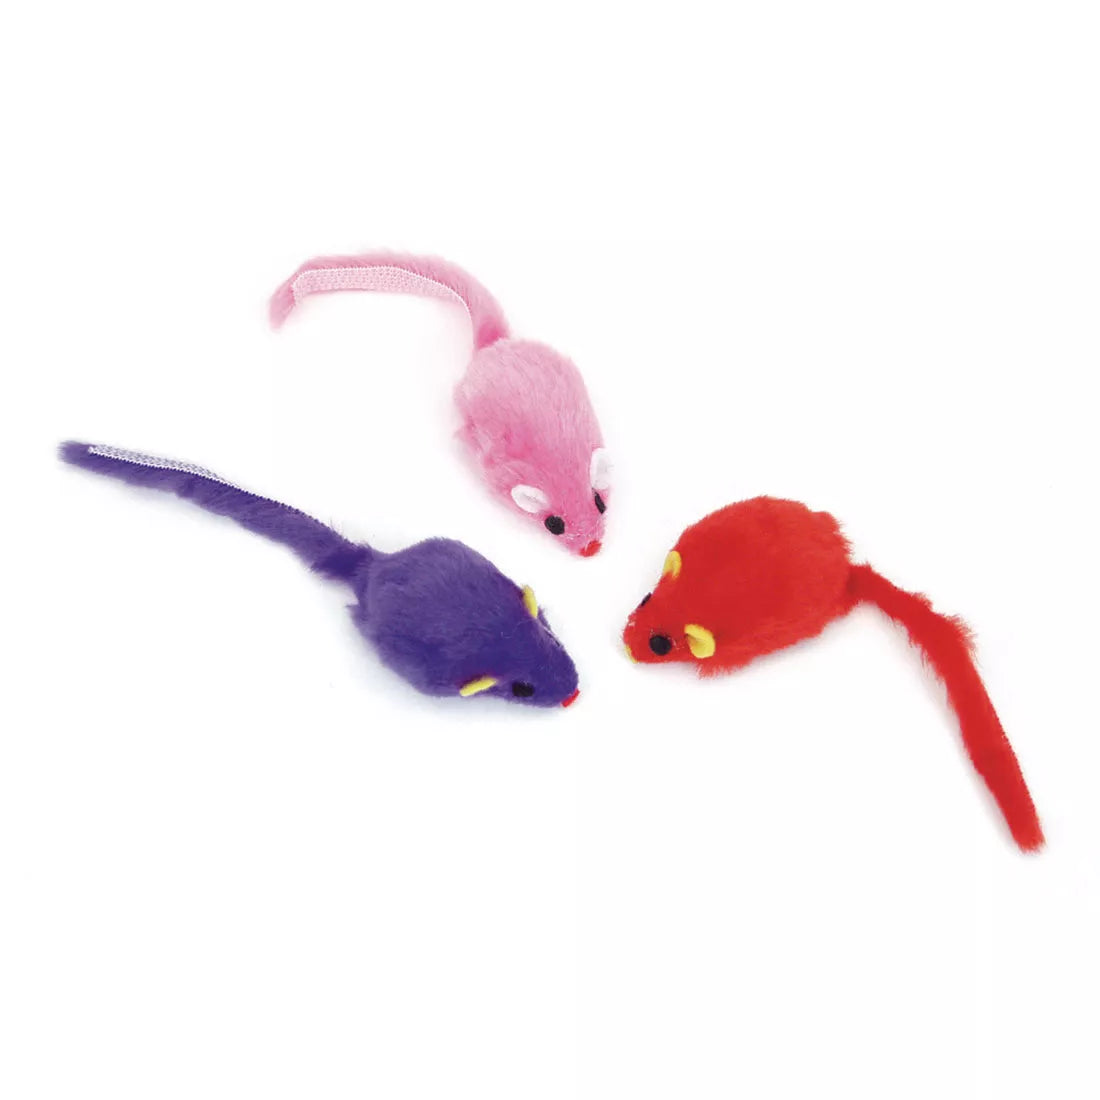 Coastal Pet Products, Coastal Pet Products Turbo Assorted Mice Cat Toys 2" Fur Mice Blue Red Pink